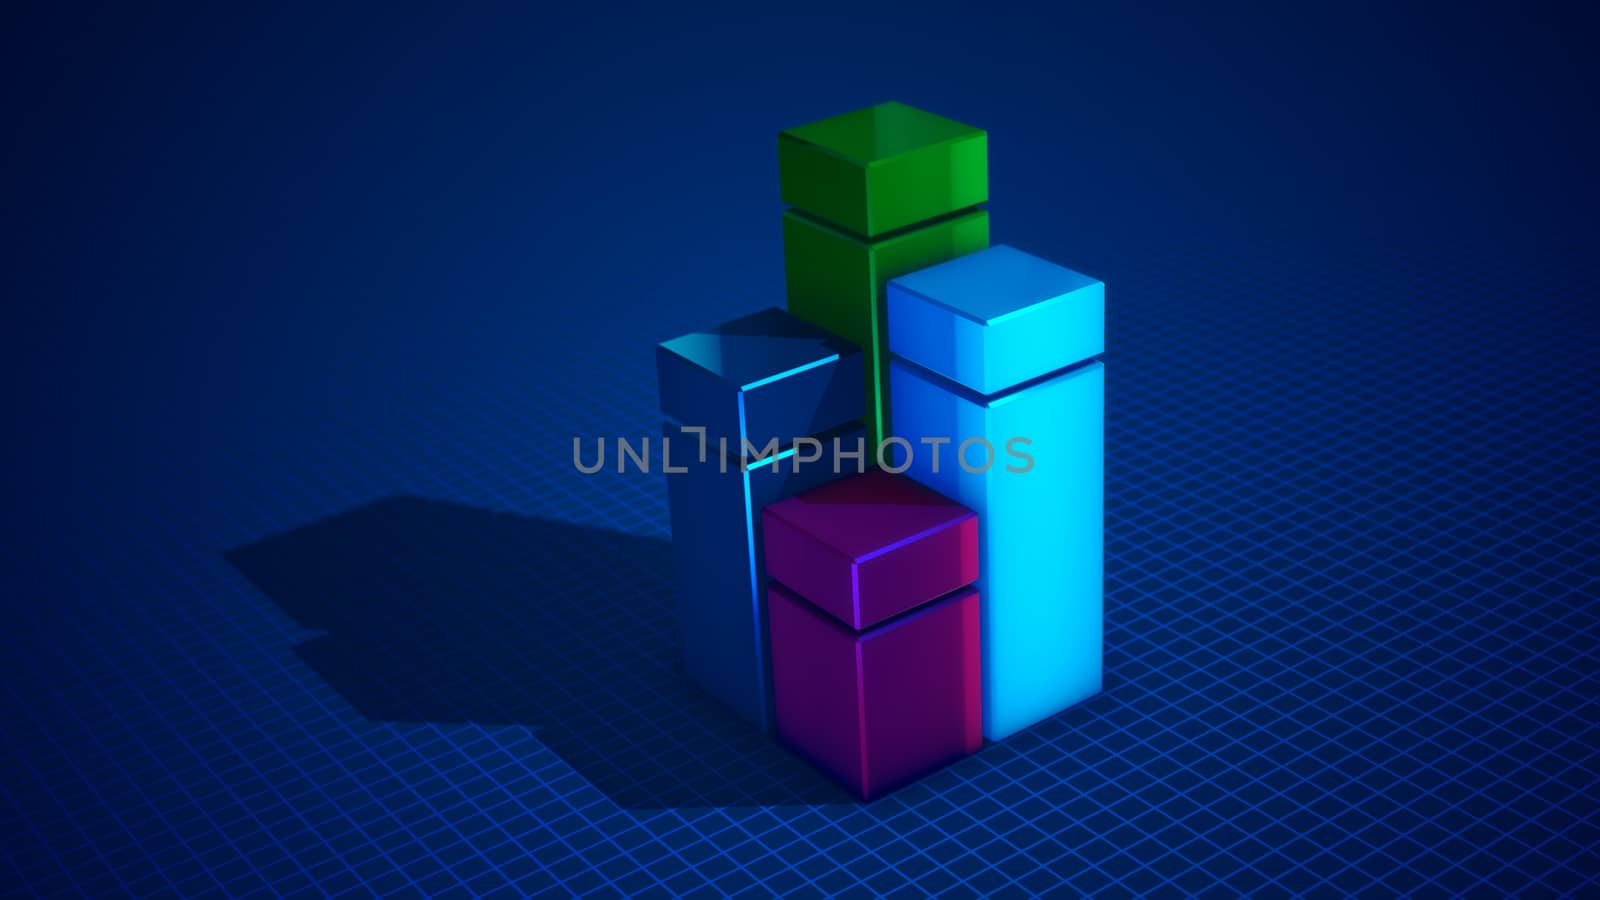 Stunning 3d illustration of four cubic squares of blue, green, celeste and pink colors forming a chart put on a light blue surface with a network. It looks optimistic, perfect and arty.